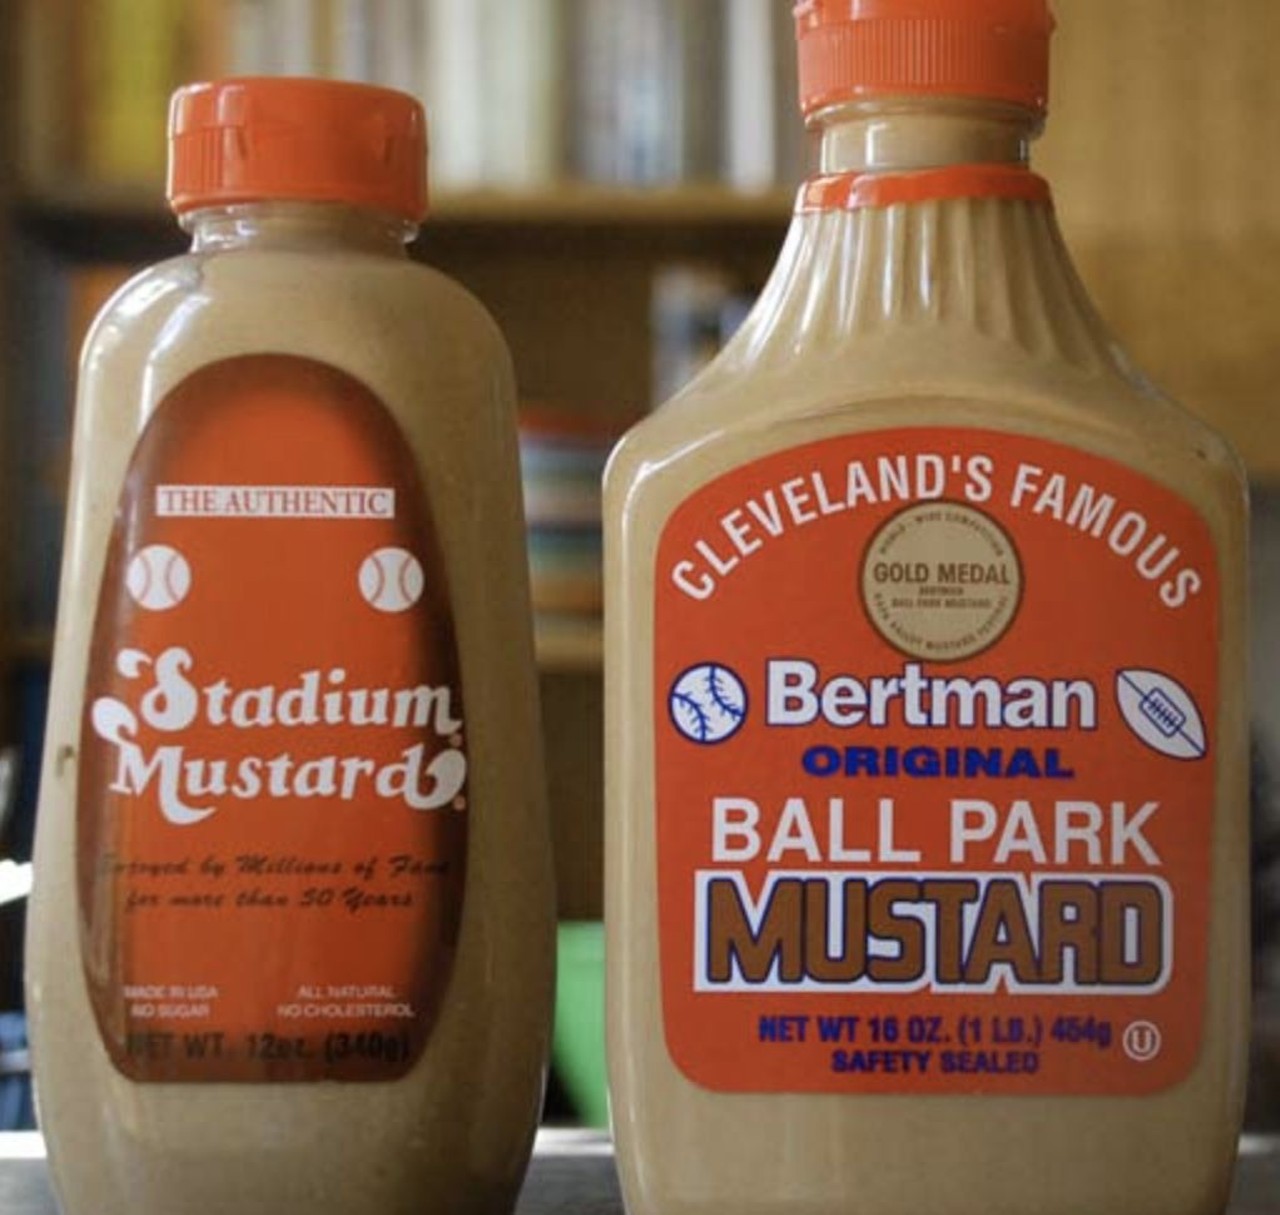 Bertman&#146;s Original Ballpark Mustard/Stadium Mustard 
What: The brown sauce we grew up with while watching the Tribe at Municipal Stadium, the Jake, and Progressive Field
Why:  The sports-associated condiment has deep roots in Cleveland, with Bertman's battling its rival, Authentic Stadium Mustard, for fans' loyalty
Photo via Scene Archives